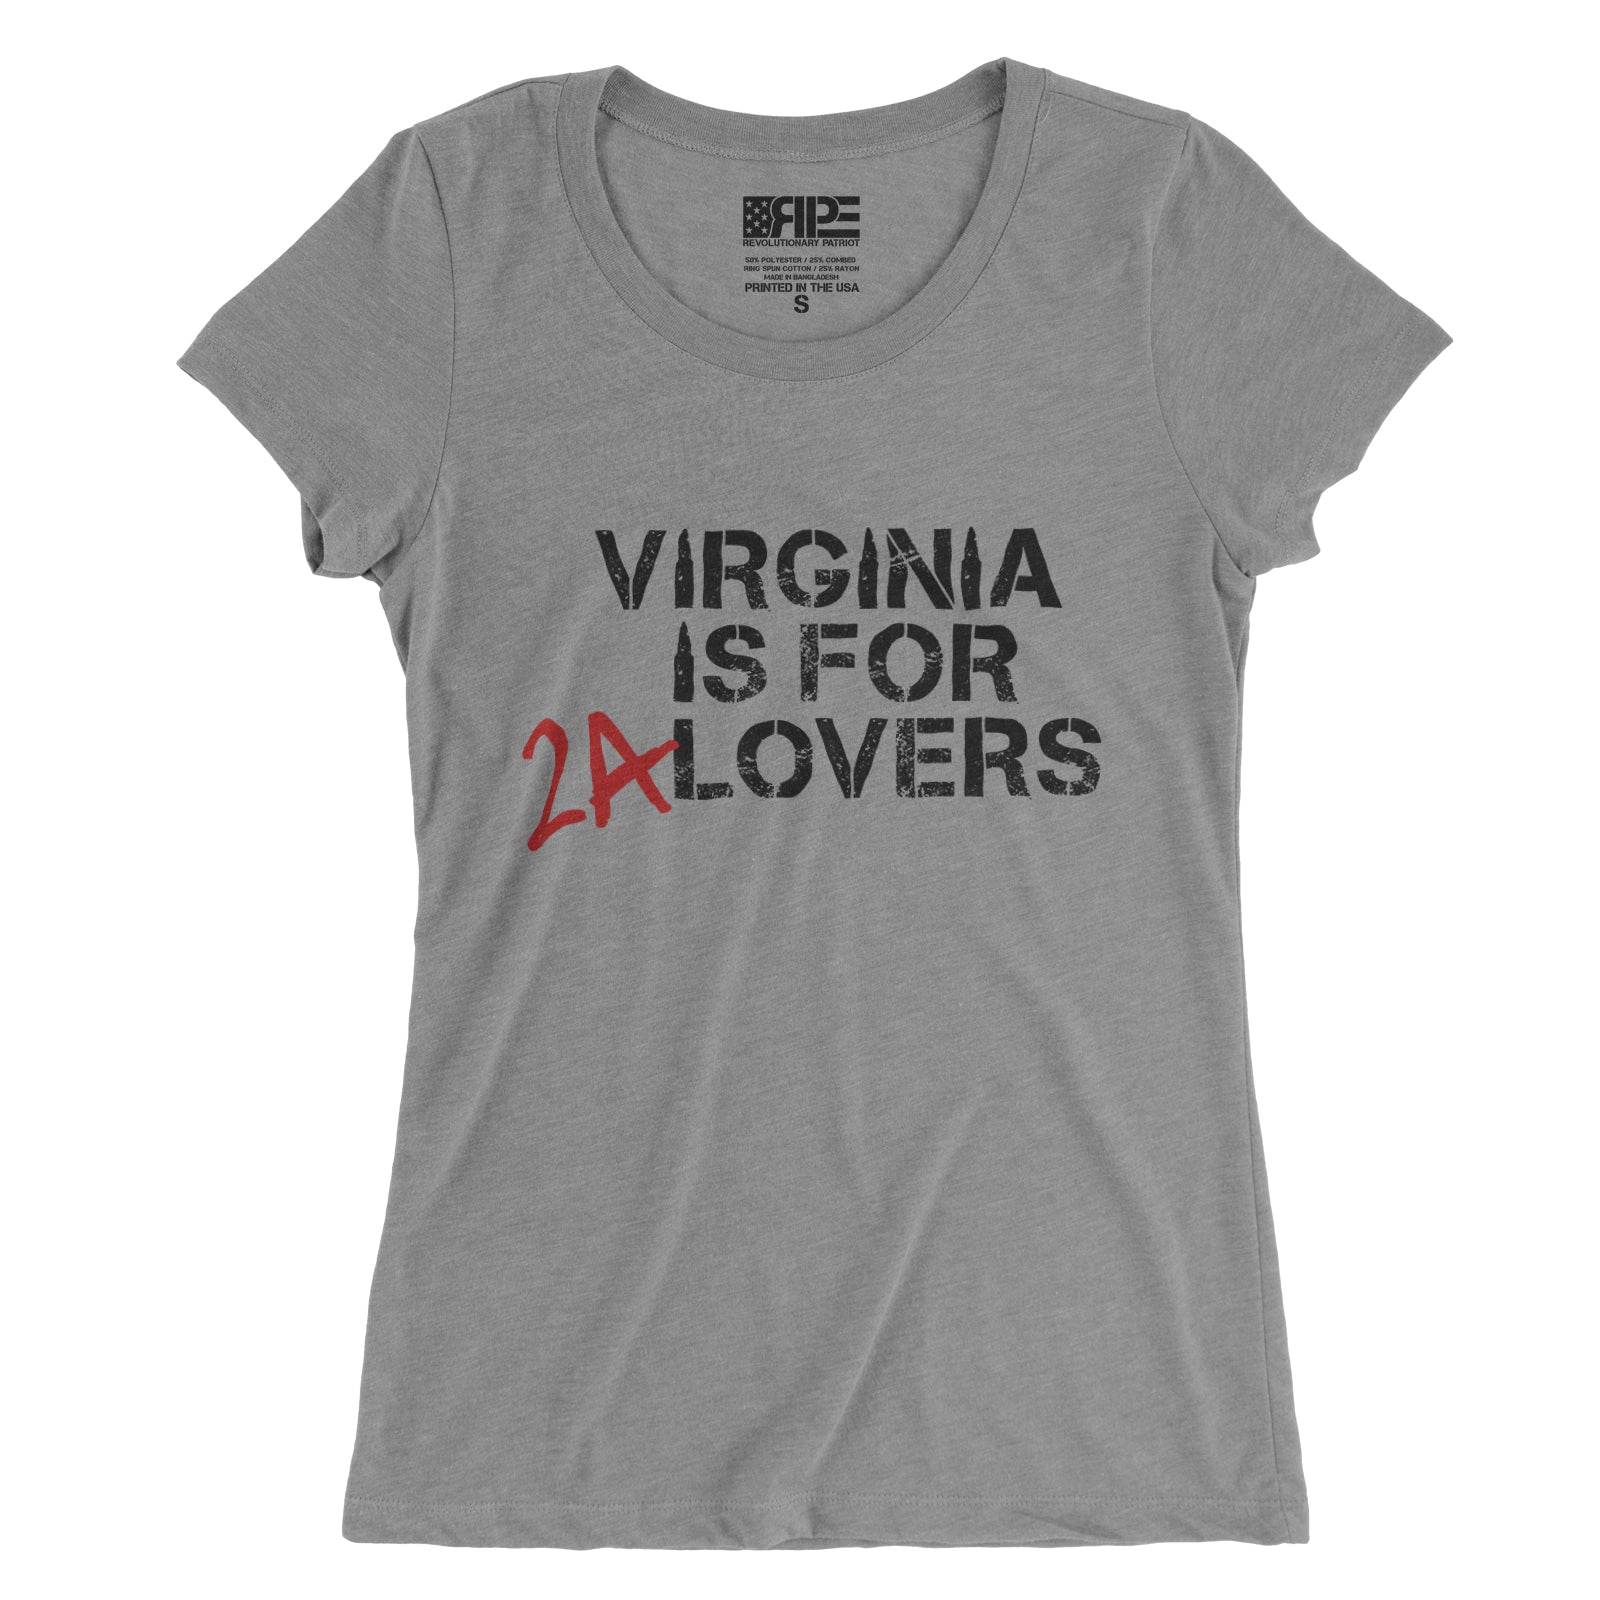 Virginia is for 2A Lovers Women's (Grey) - Revolutionary Patriot